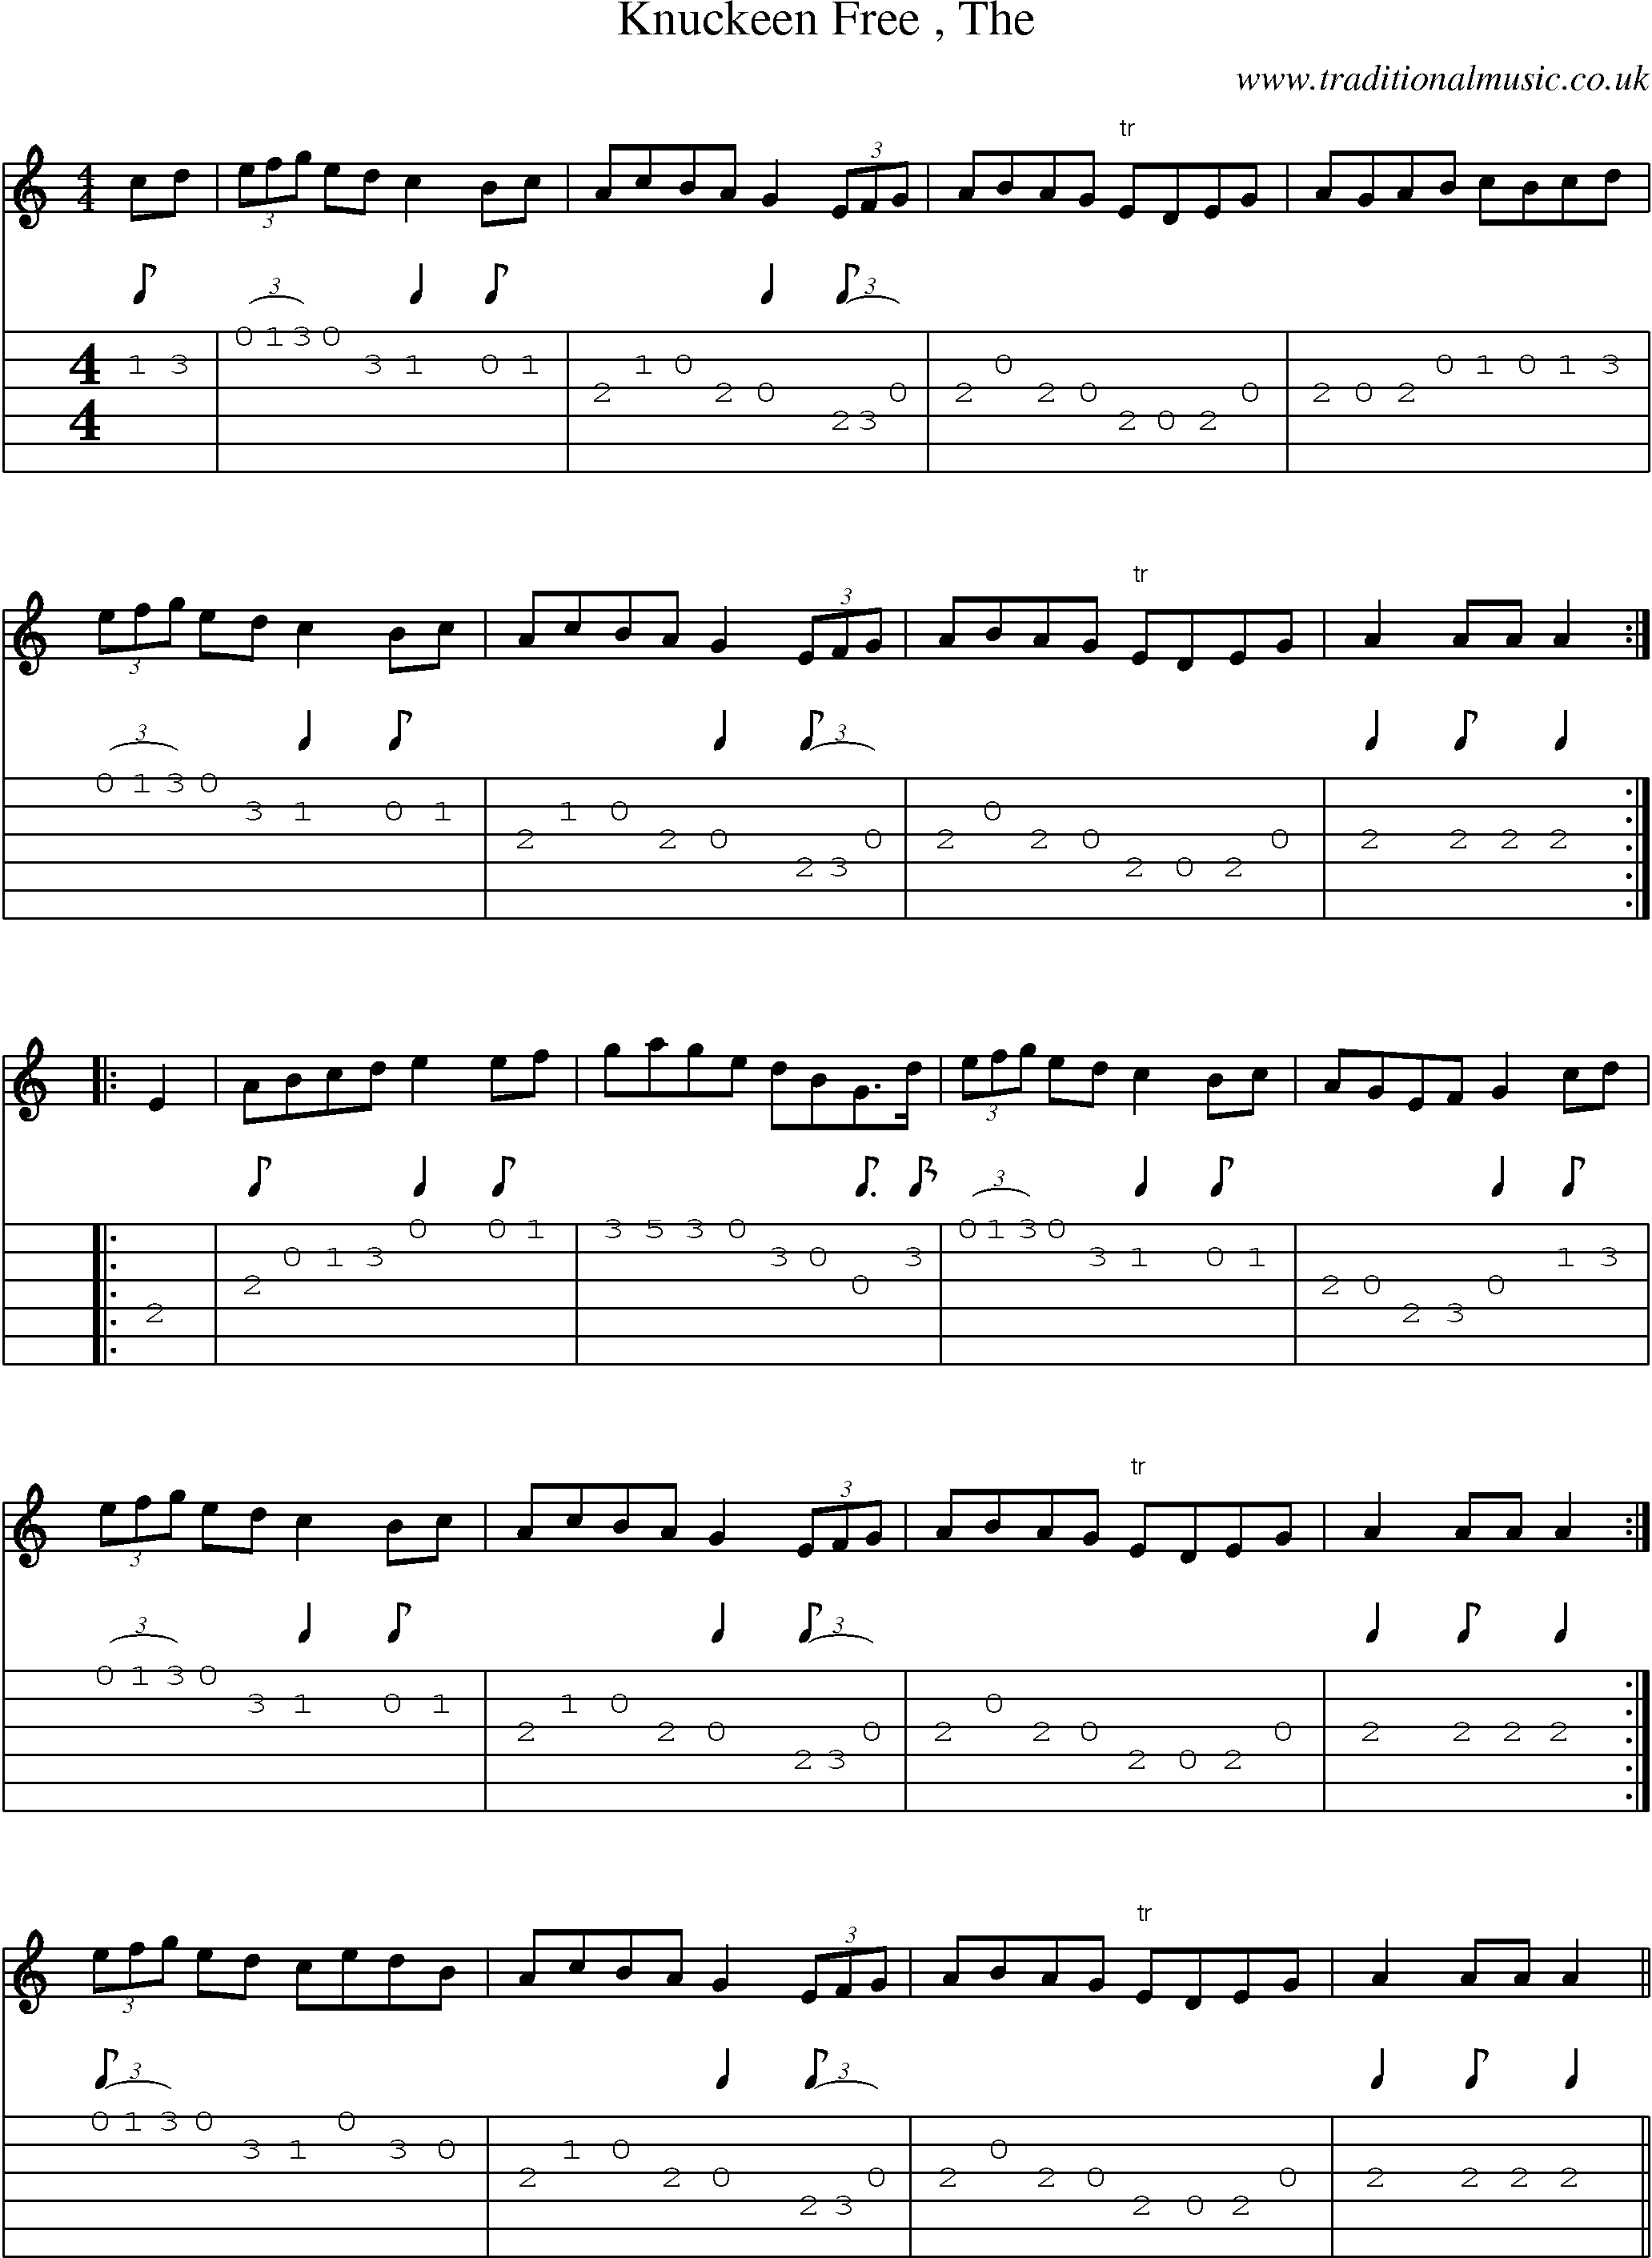 Music Score and Guitar Tabs for Knuckeen Free